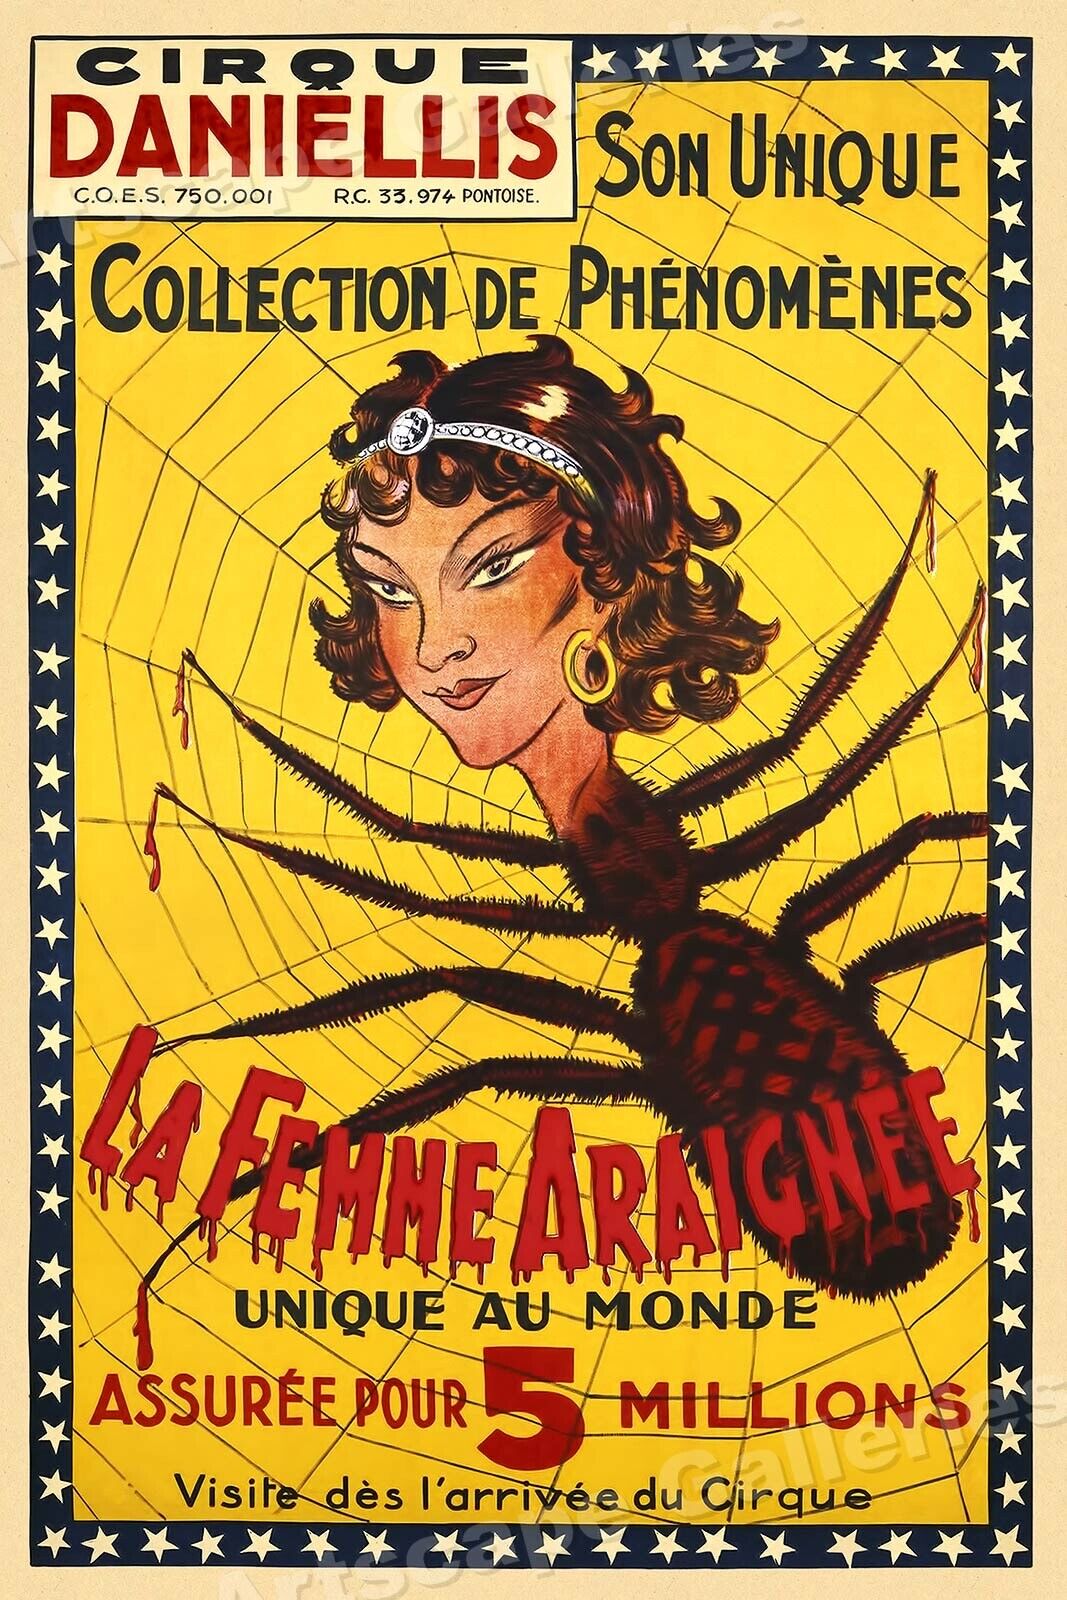 1920s Spider Woman Freak Vintage Style Unusual Circus Poster - 24x36